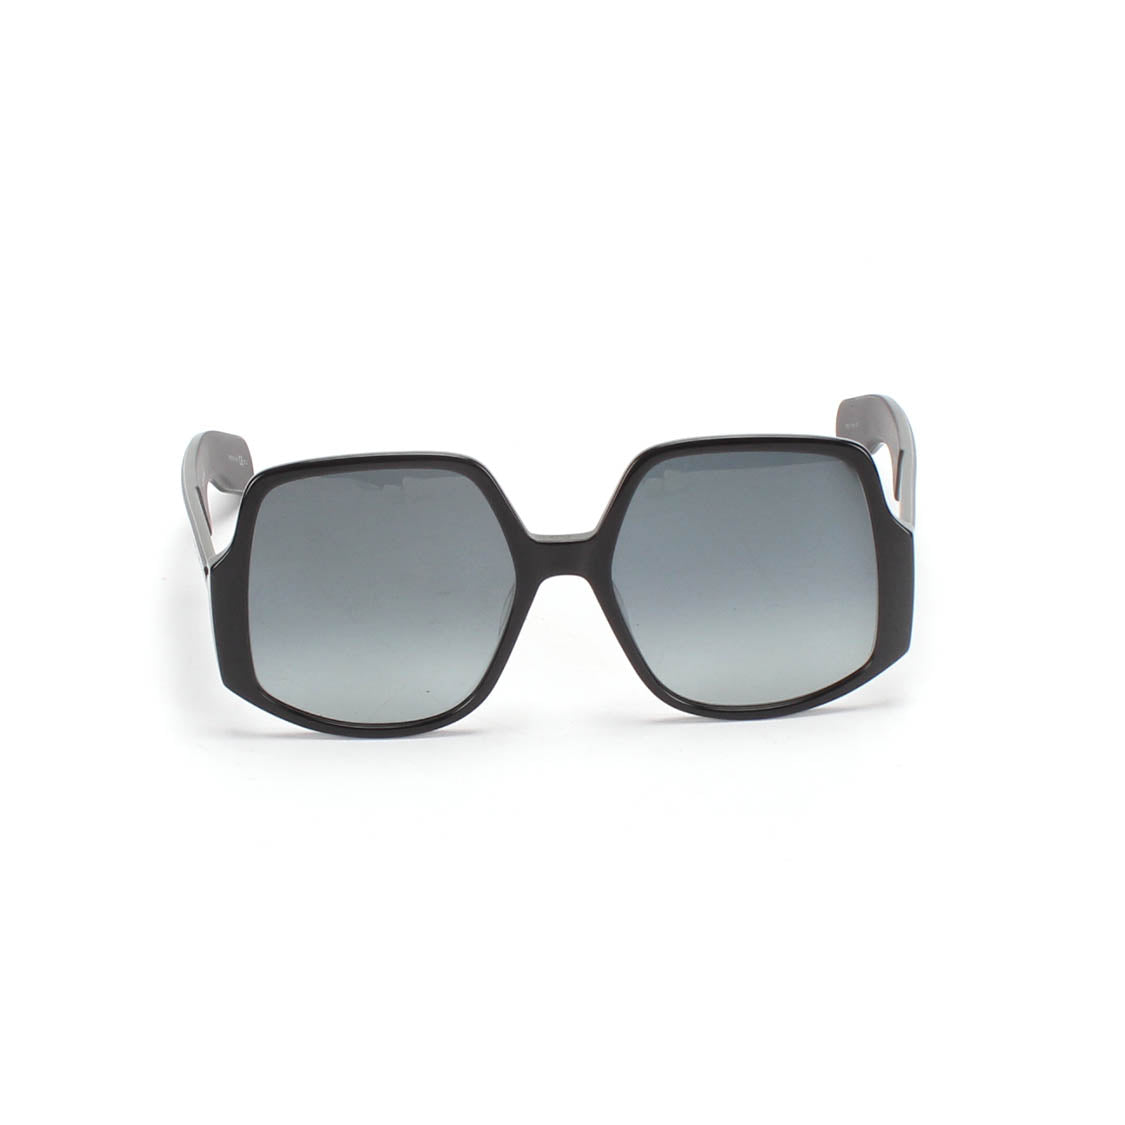 DiorInsideOut 1 Tinted Sunglasses